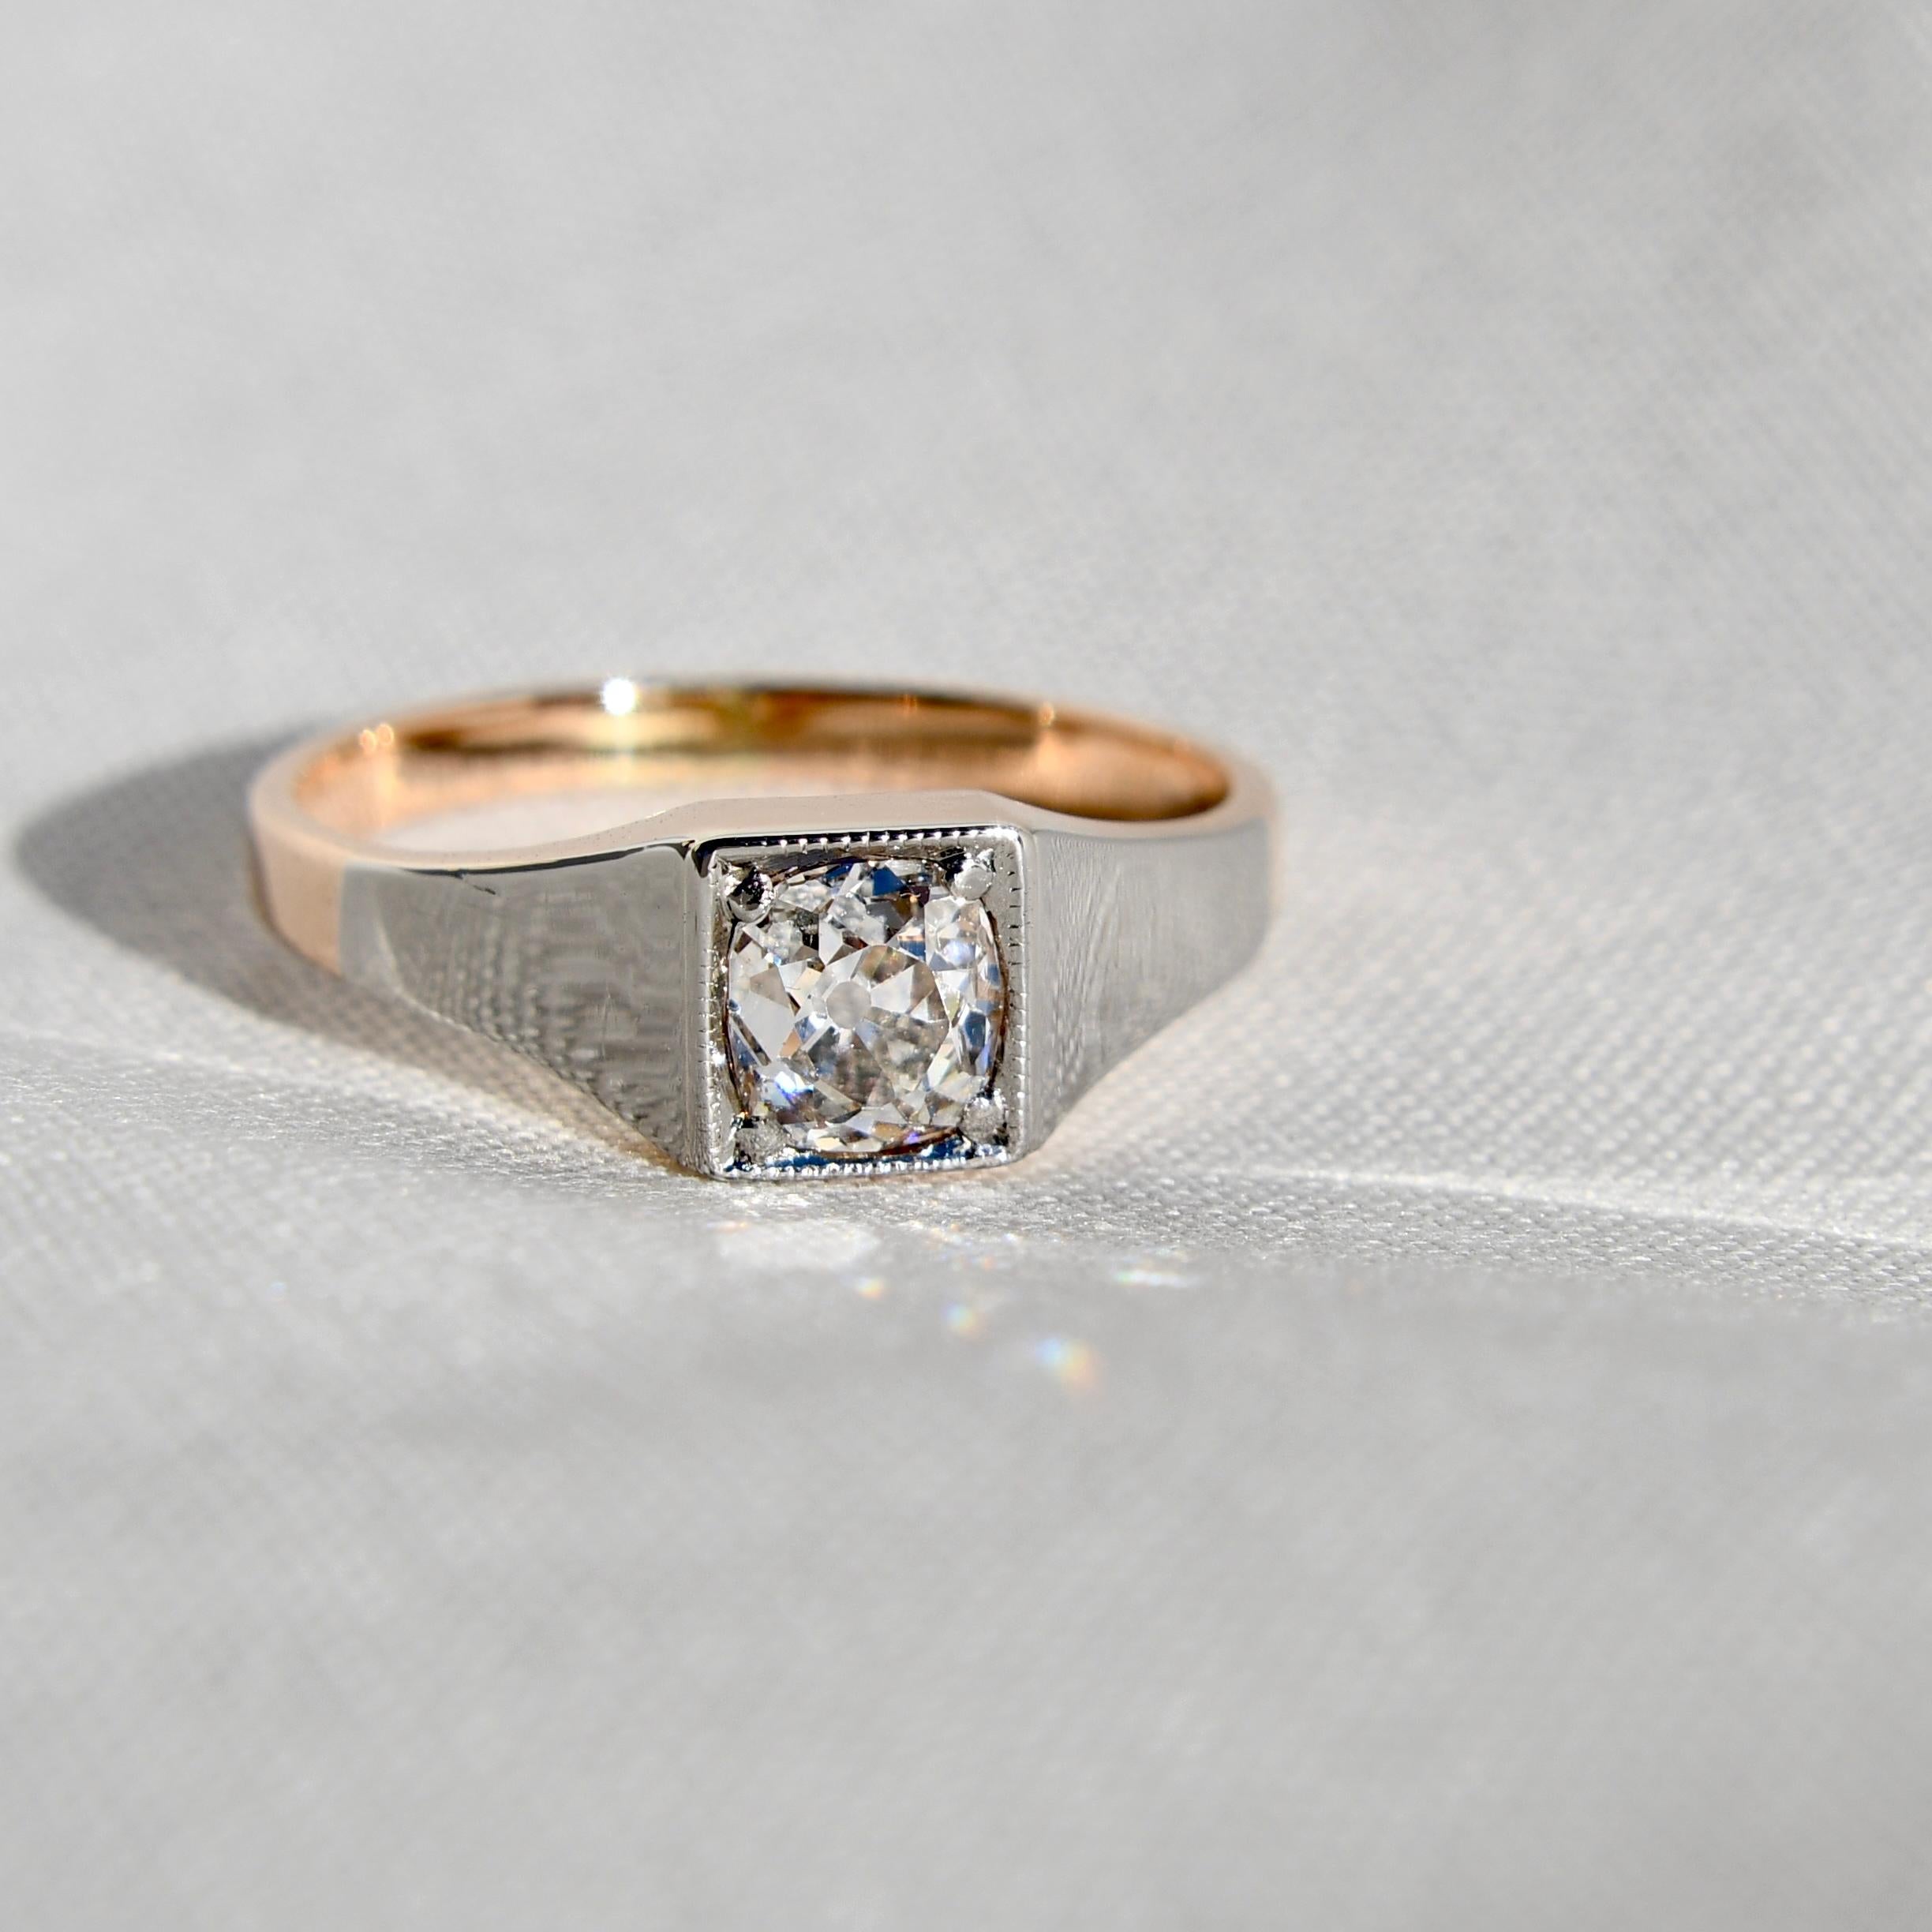 This ring was made in Germany around 1910 and is in excellent, antique condition. 

A GIA certificate for the diamond is included.

- One old mine cut diamond, 5.50 x 5.00 x 3.99 mm/ 0.89ct (J/ SI1) 
- 585/ 14 ct yellow gold and platinum (hallmarked